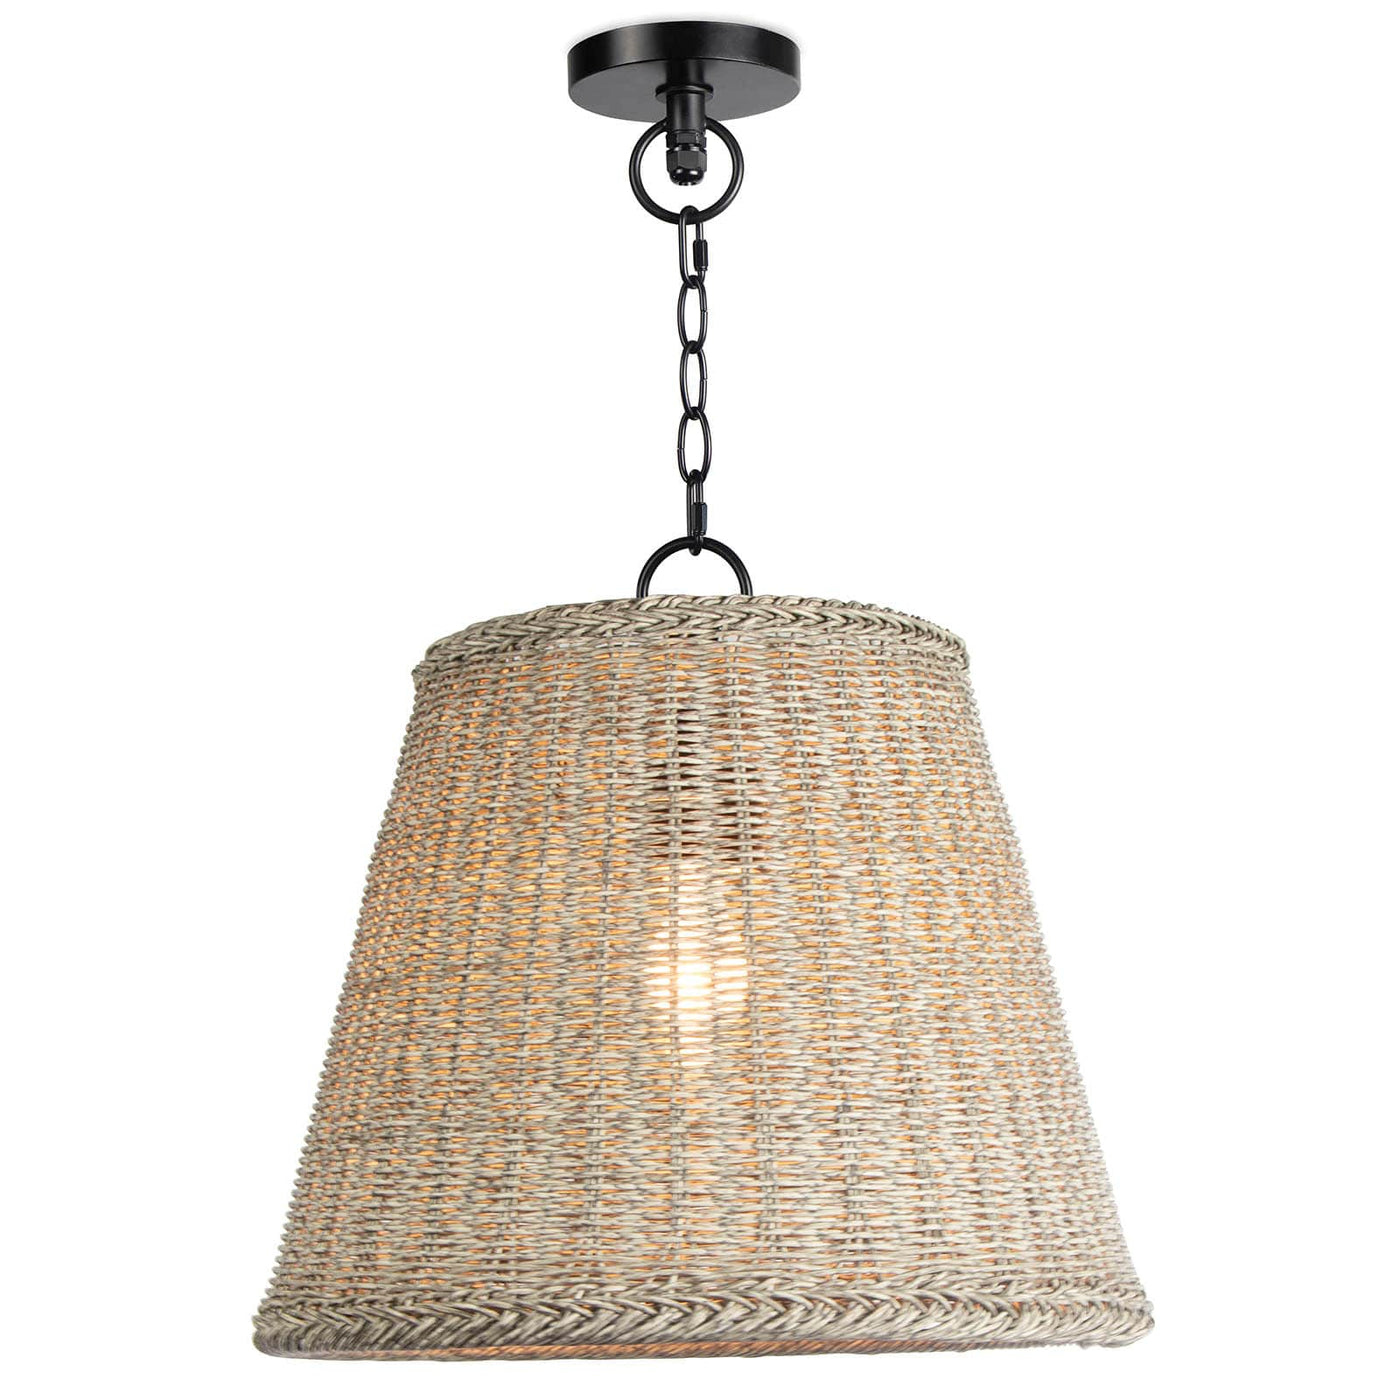 AUGUSTINE OUTDOOR PENDANT BY COASTAL LIVING